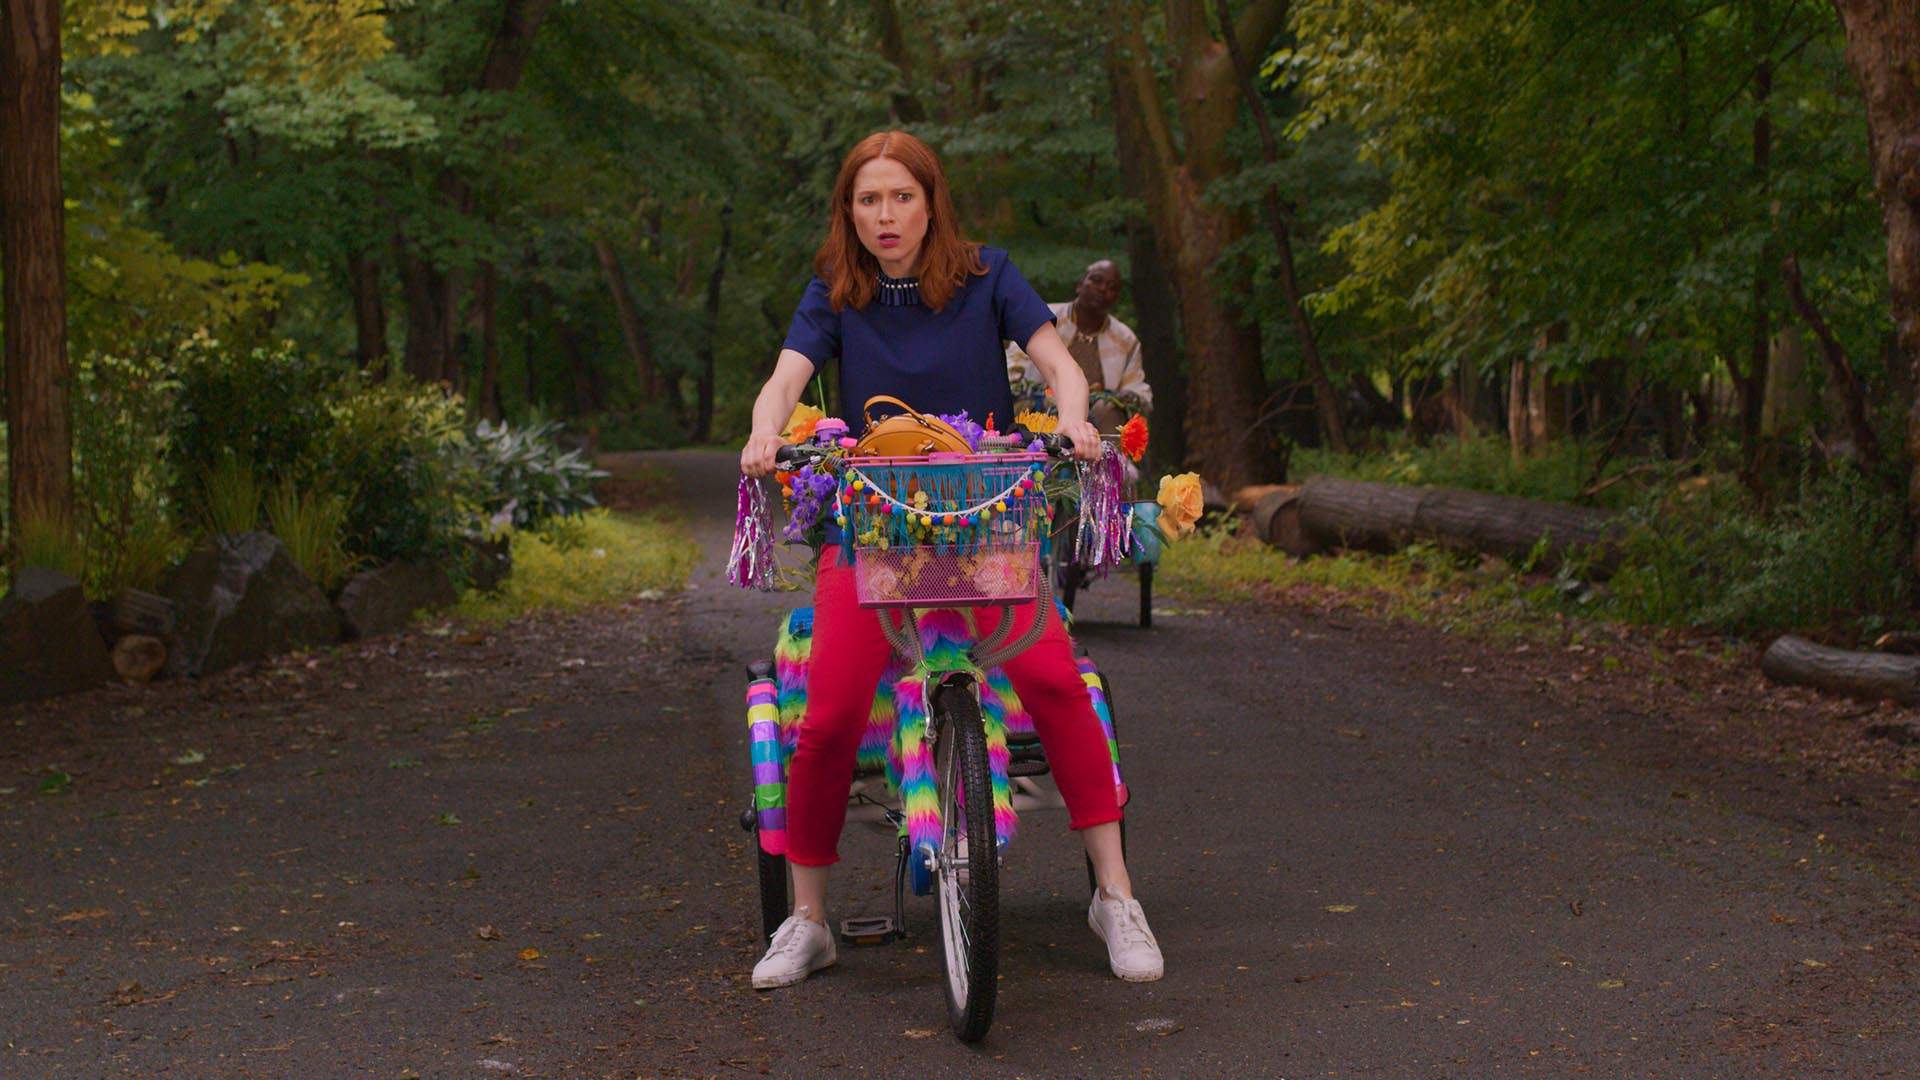 The Trailer for the Choose-Your-Own-Adventure Episode of 'Unbreakable Kimmy Schmidt' Is Here